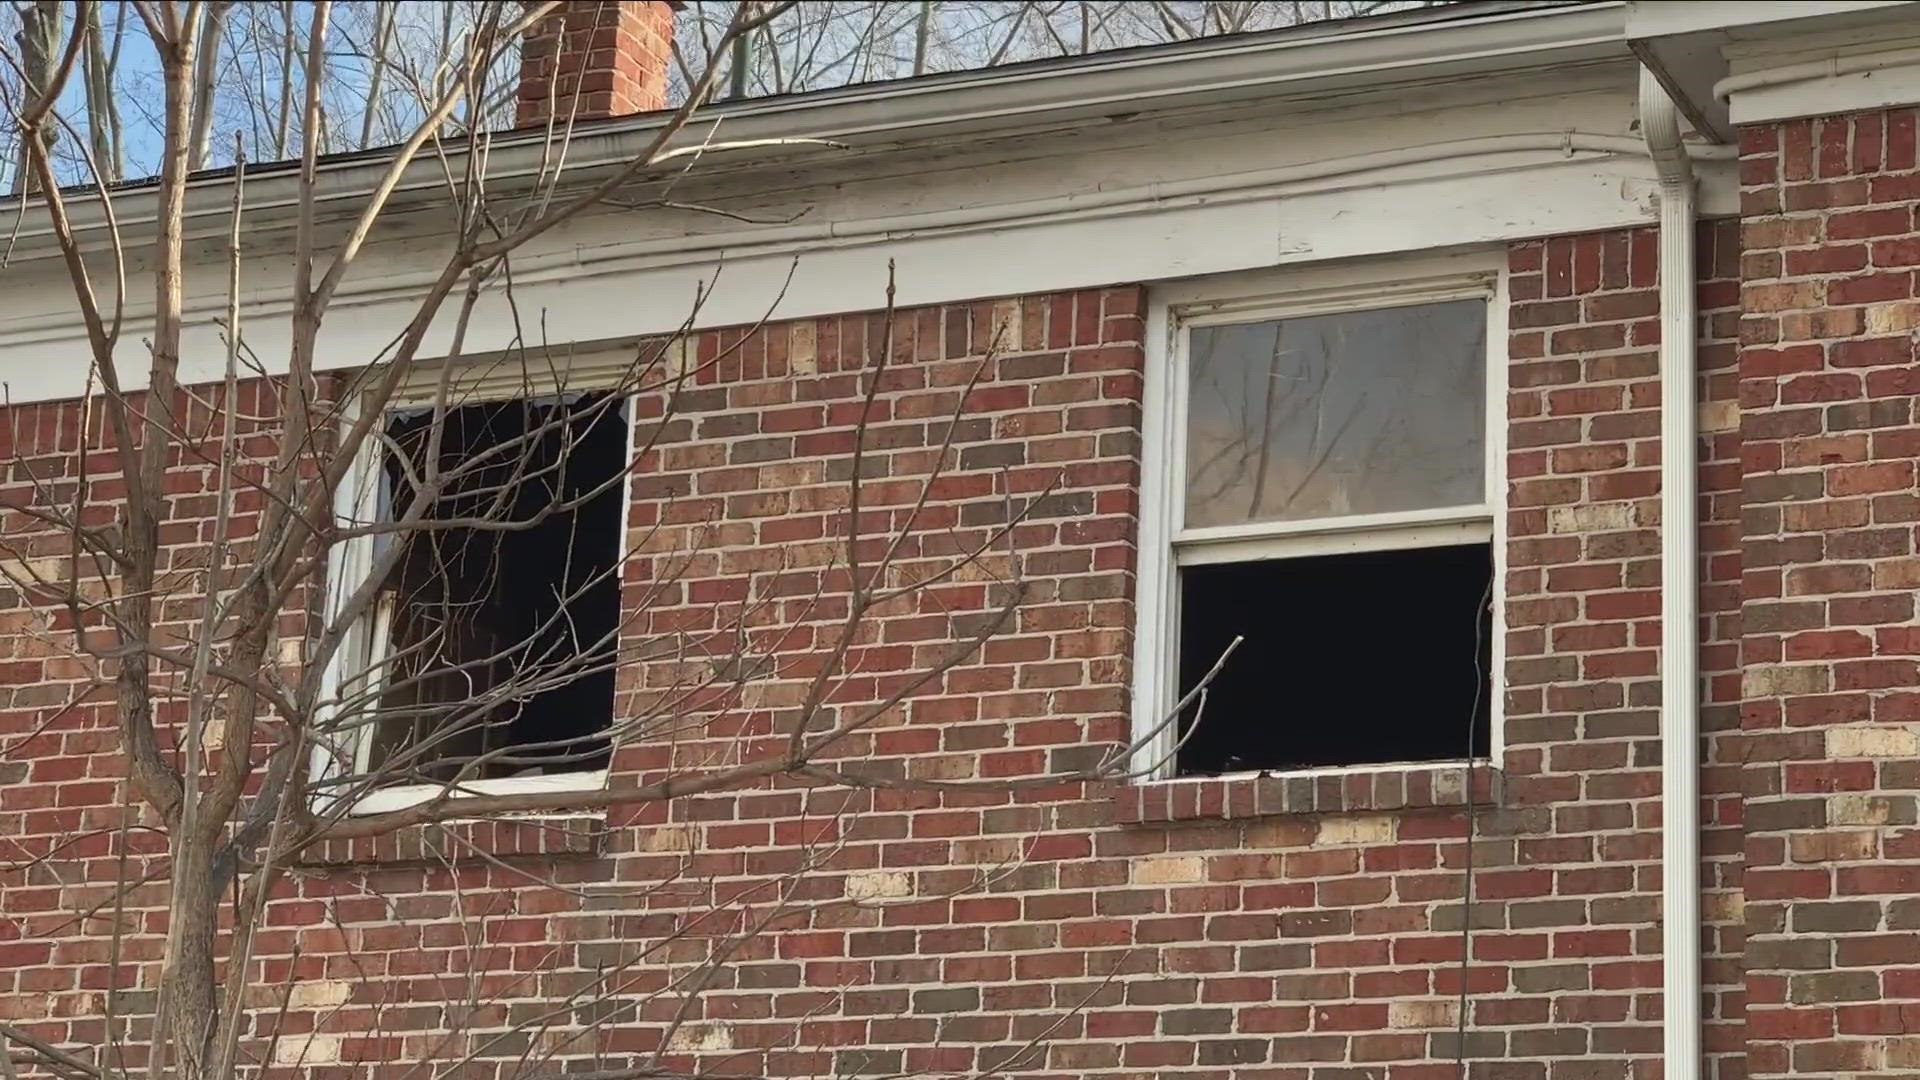 THE FIRE BROKE OUT AROUND EIGHT LAST NIGHT... AT AN APARTMENT ON JACKSON STREET... IN THE VILLAGE OF YOUNGSTOWN.